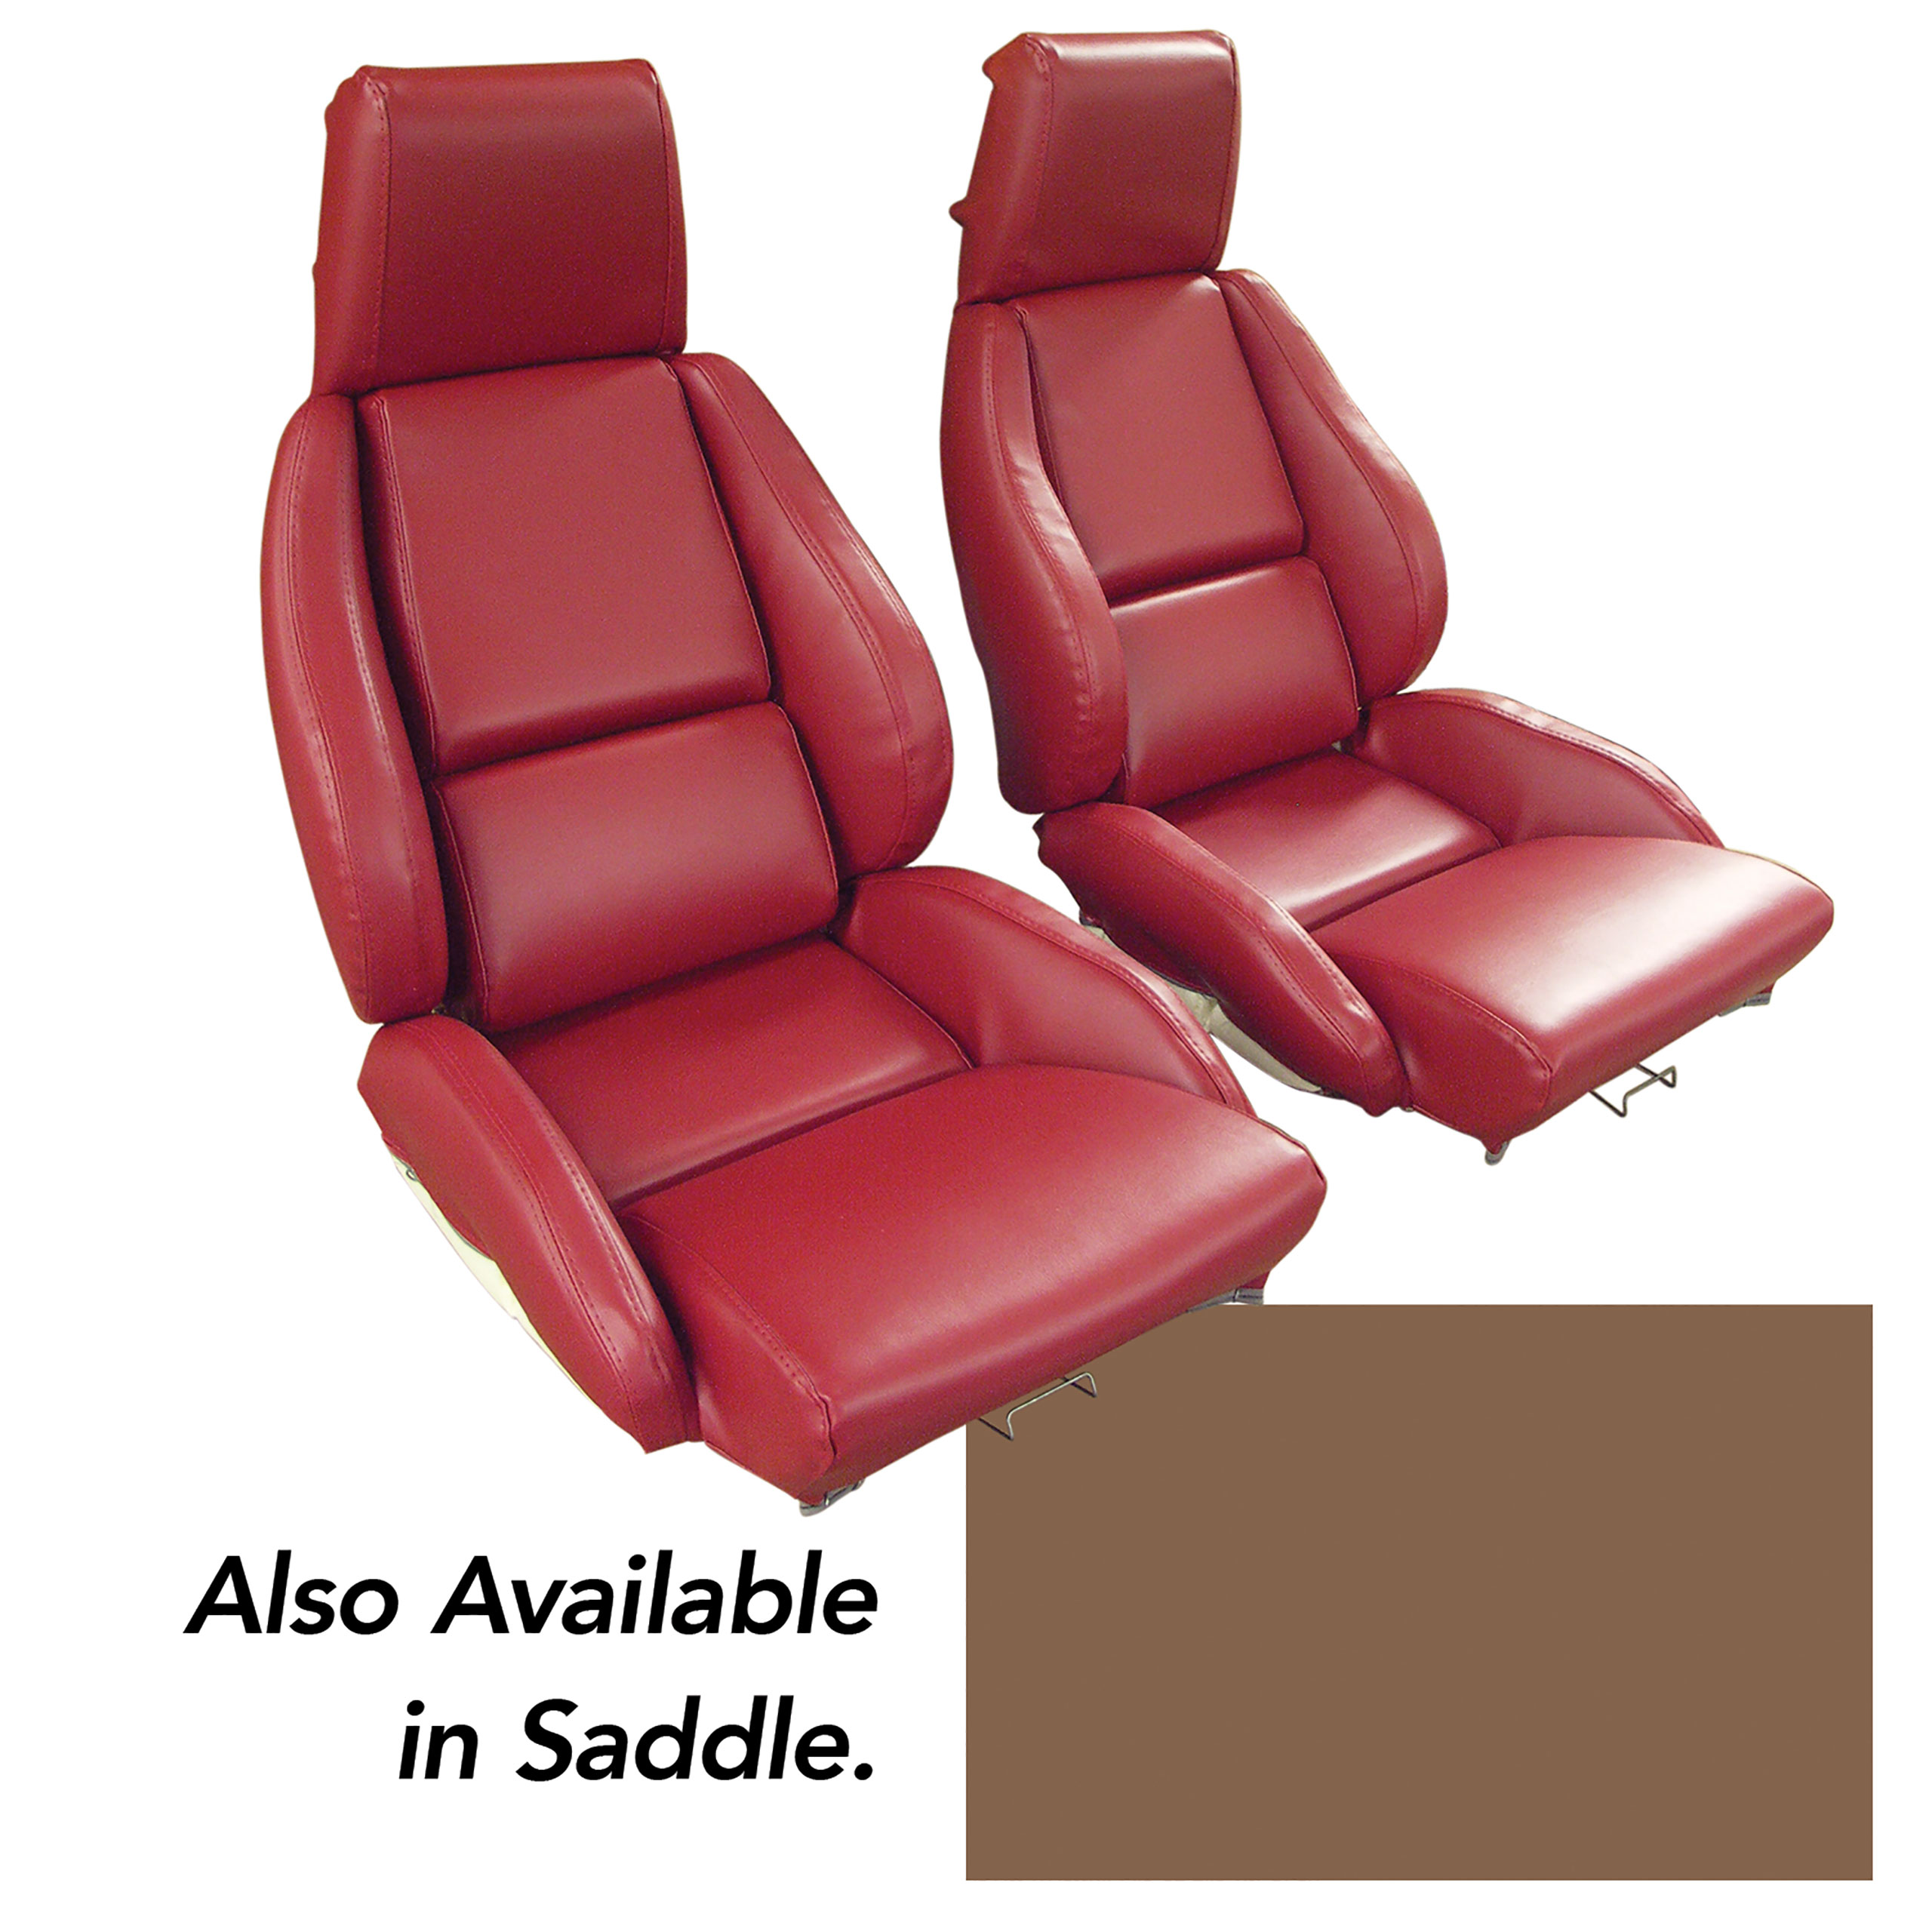 88 Corvette C4 Mounted Leather-Like Vinyl Seat Covers Saddle Standard No-Perforations CA-468878 